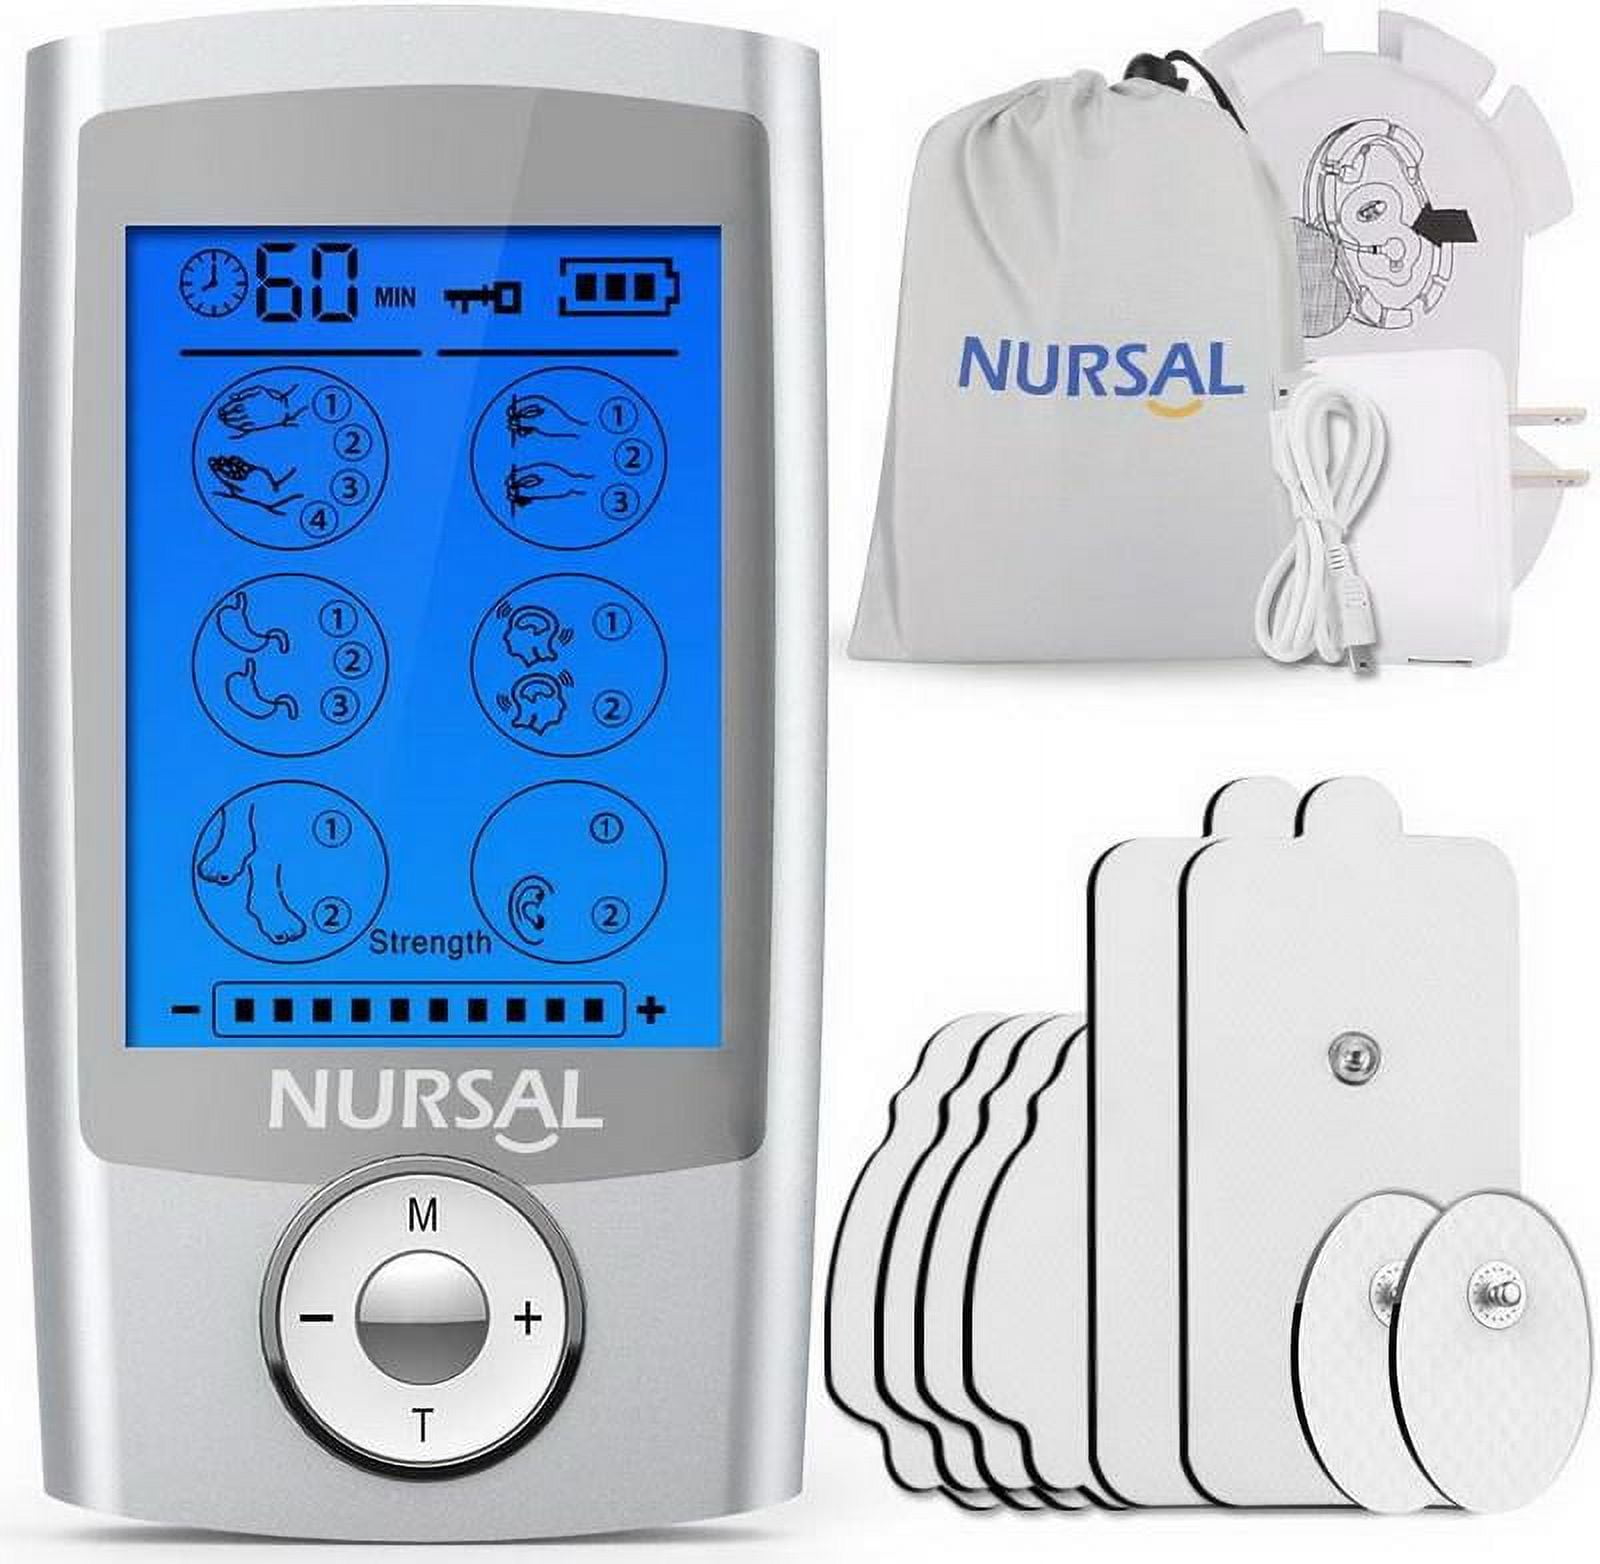 Comfier Tens Unit Muscle Stimulator with 2 Channels, Electric Pulse Back Massager for Pain Relief Therapy with 24 Modes-CF-8015